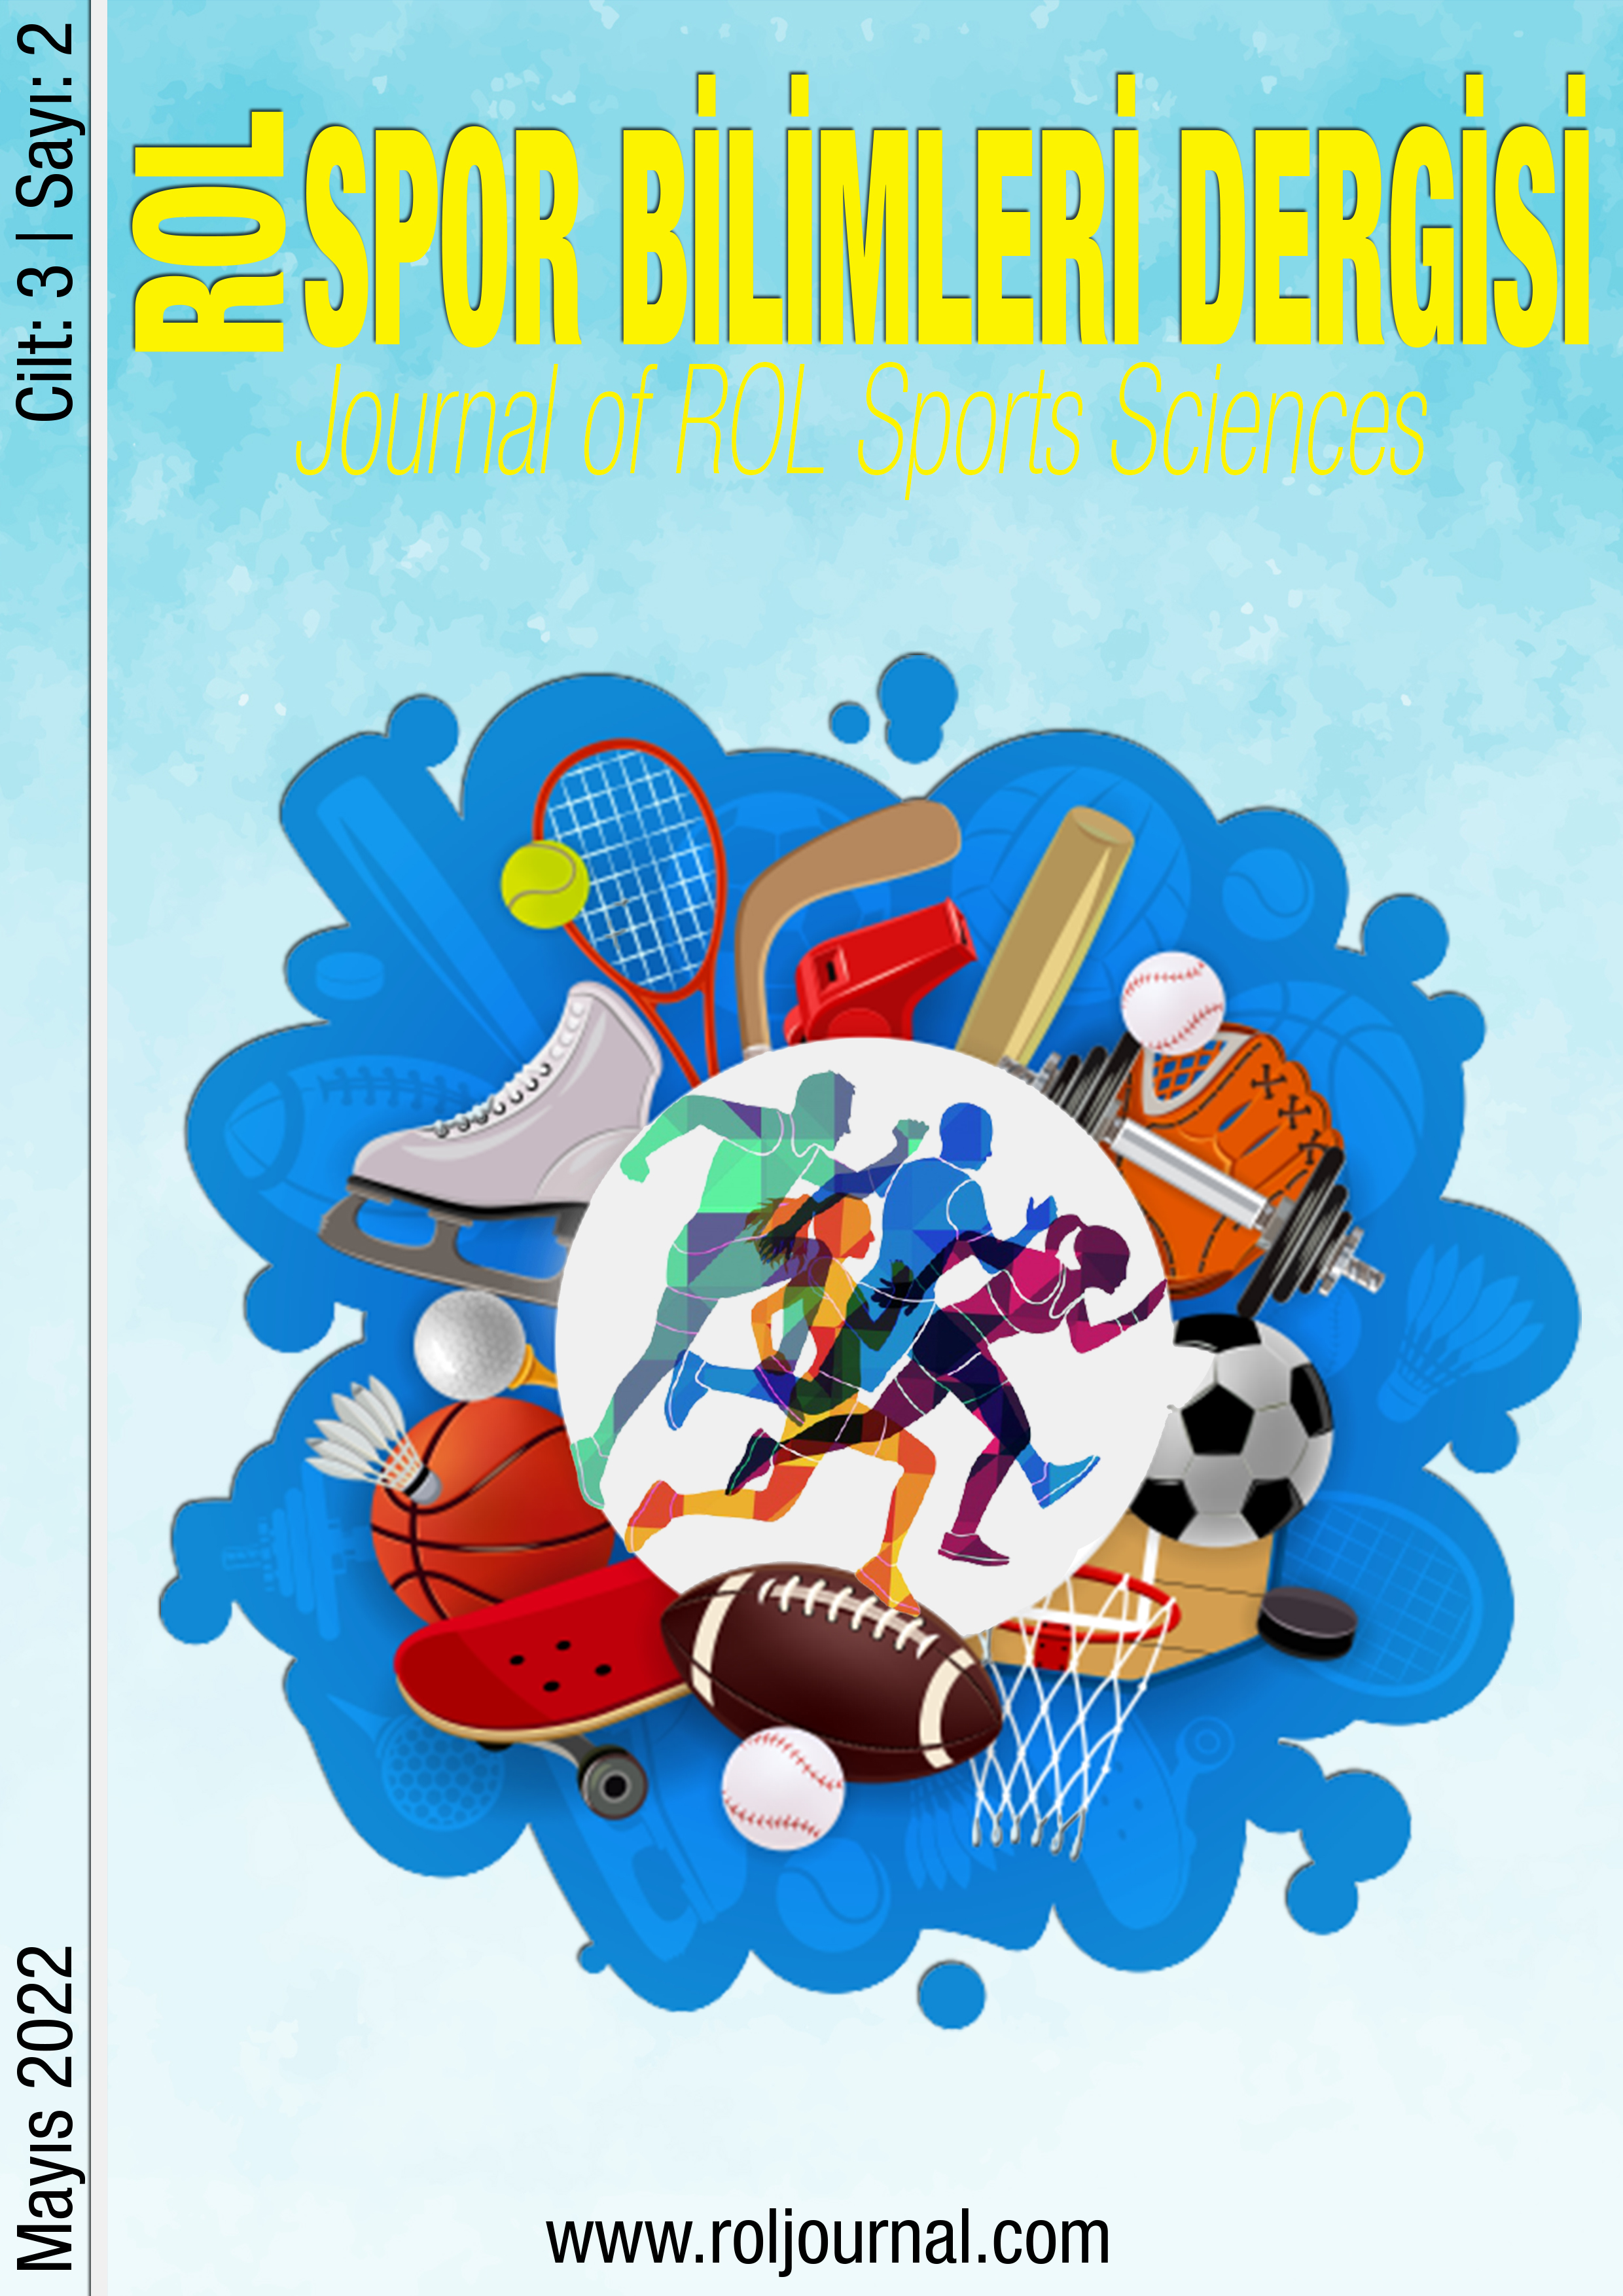 					View Vol. 3 No. 2 (2022): Journal of ROL Sports Sciences
				